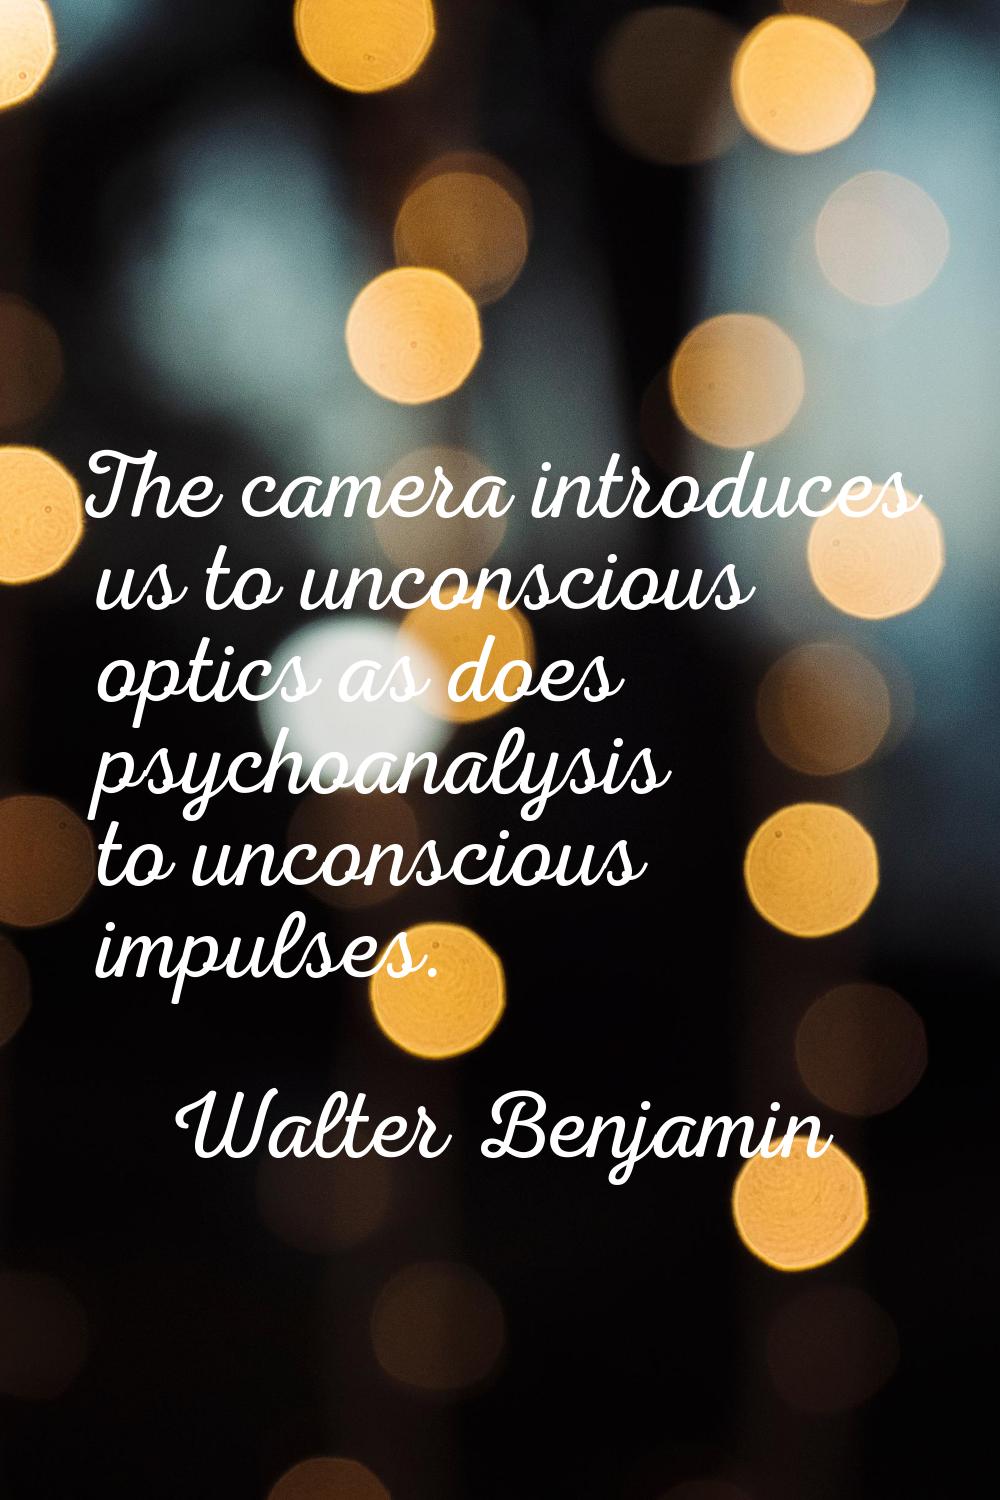 The camera introduces us to unconscious optics as does psychoanalysis to unconscious impulses.